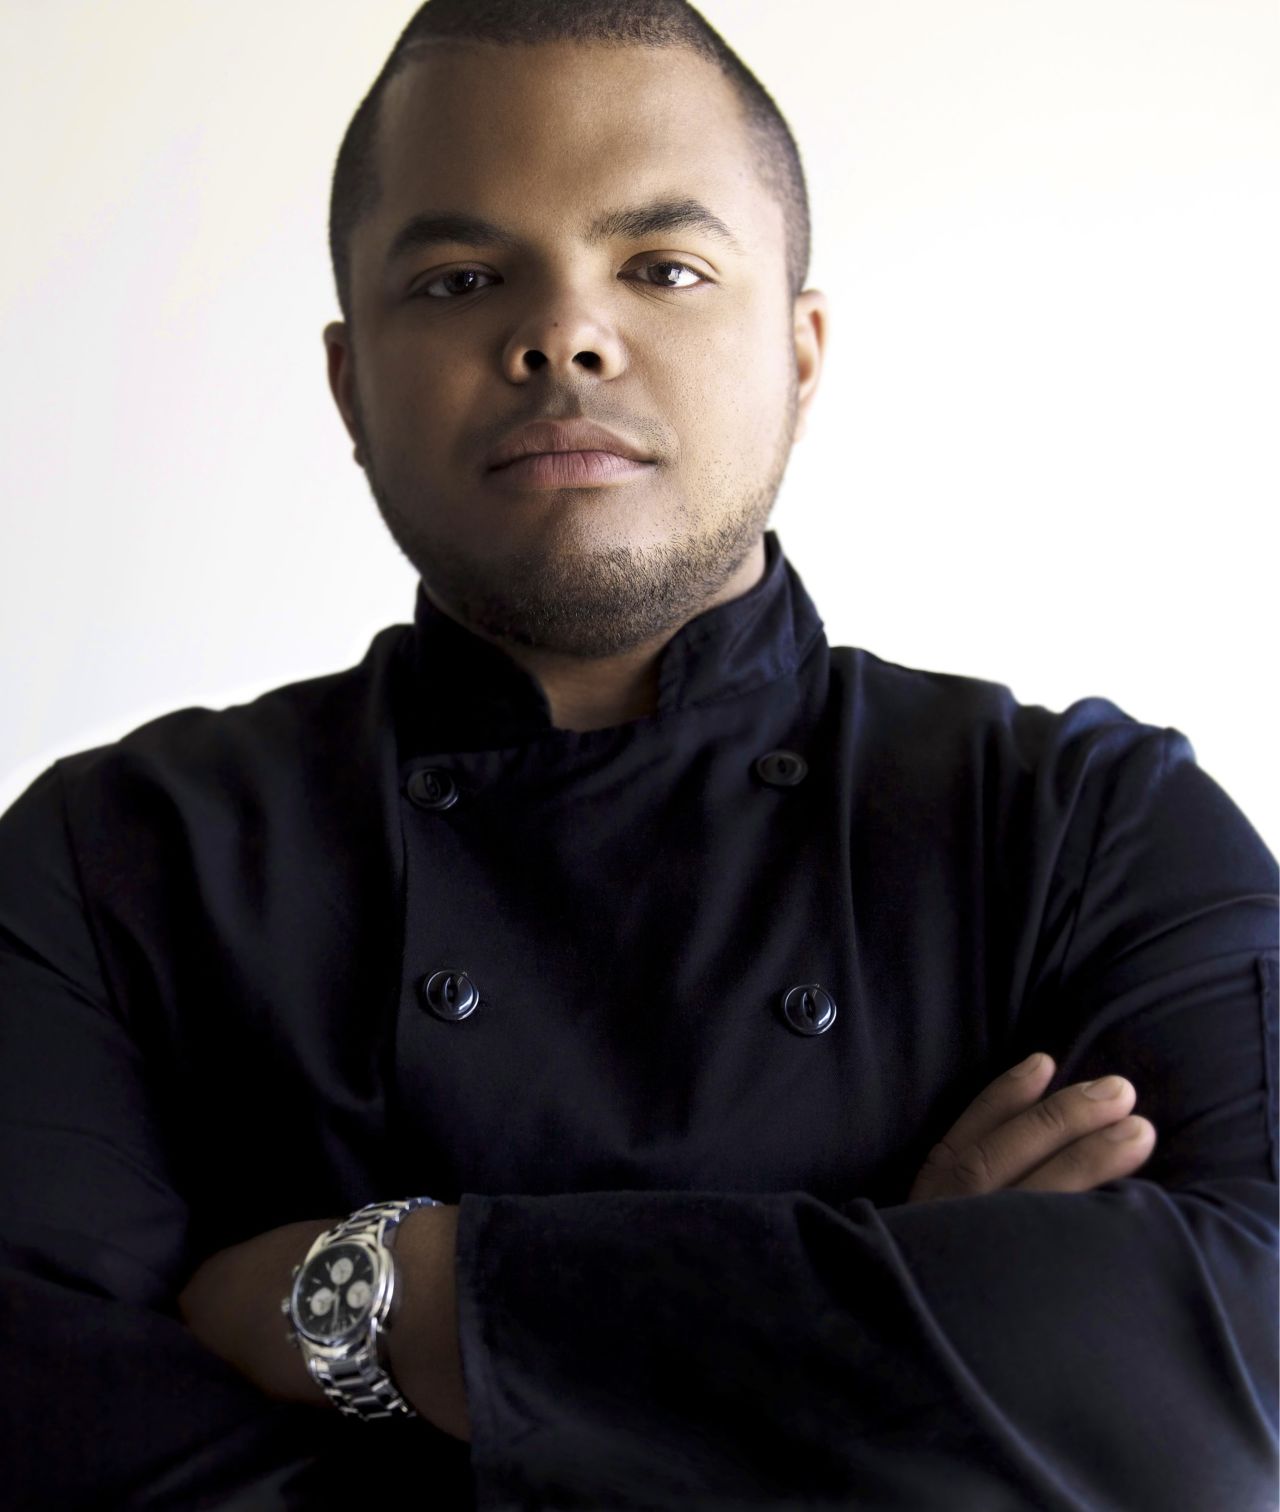 More at Toronto Pearson International Airport! Canadian celebrity chef, cooking show host and cookbook author, Roger Mooking, gives North American comfort food a "twist" -- scones with lavender honey and peameal bacon are an example.